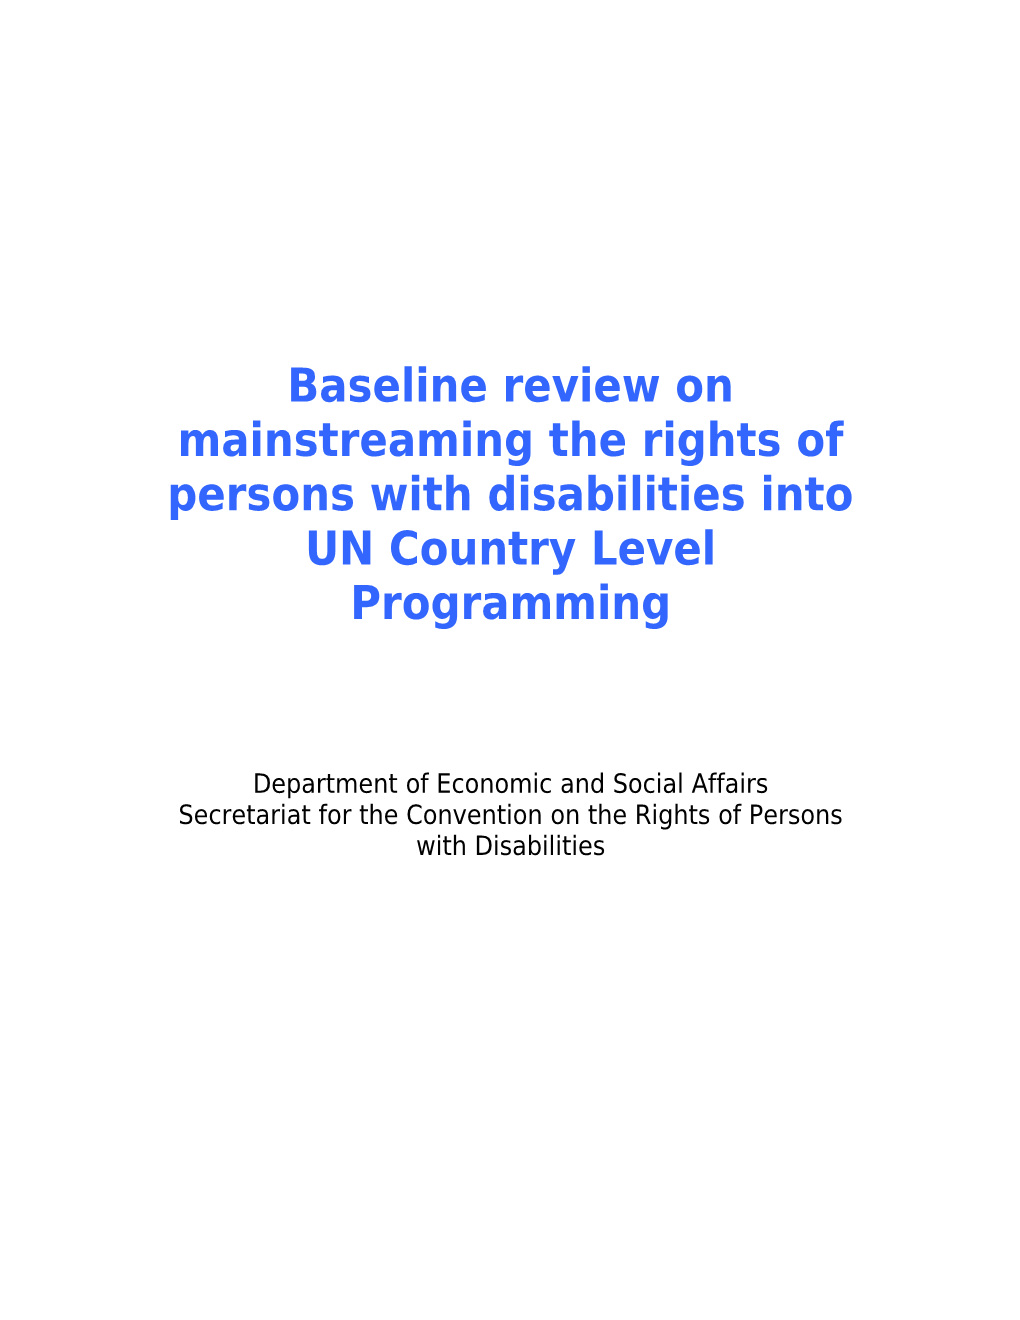 Baseline Review On Mainstreaming The Rights Of Persons With Disabilities Into UN Country Level Programming